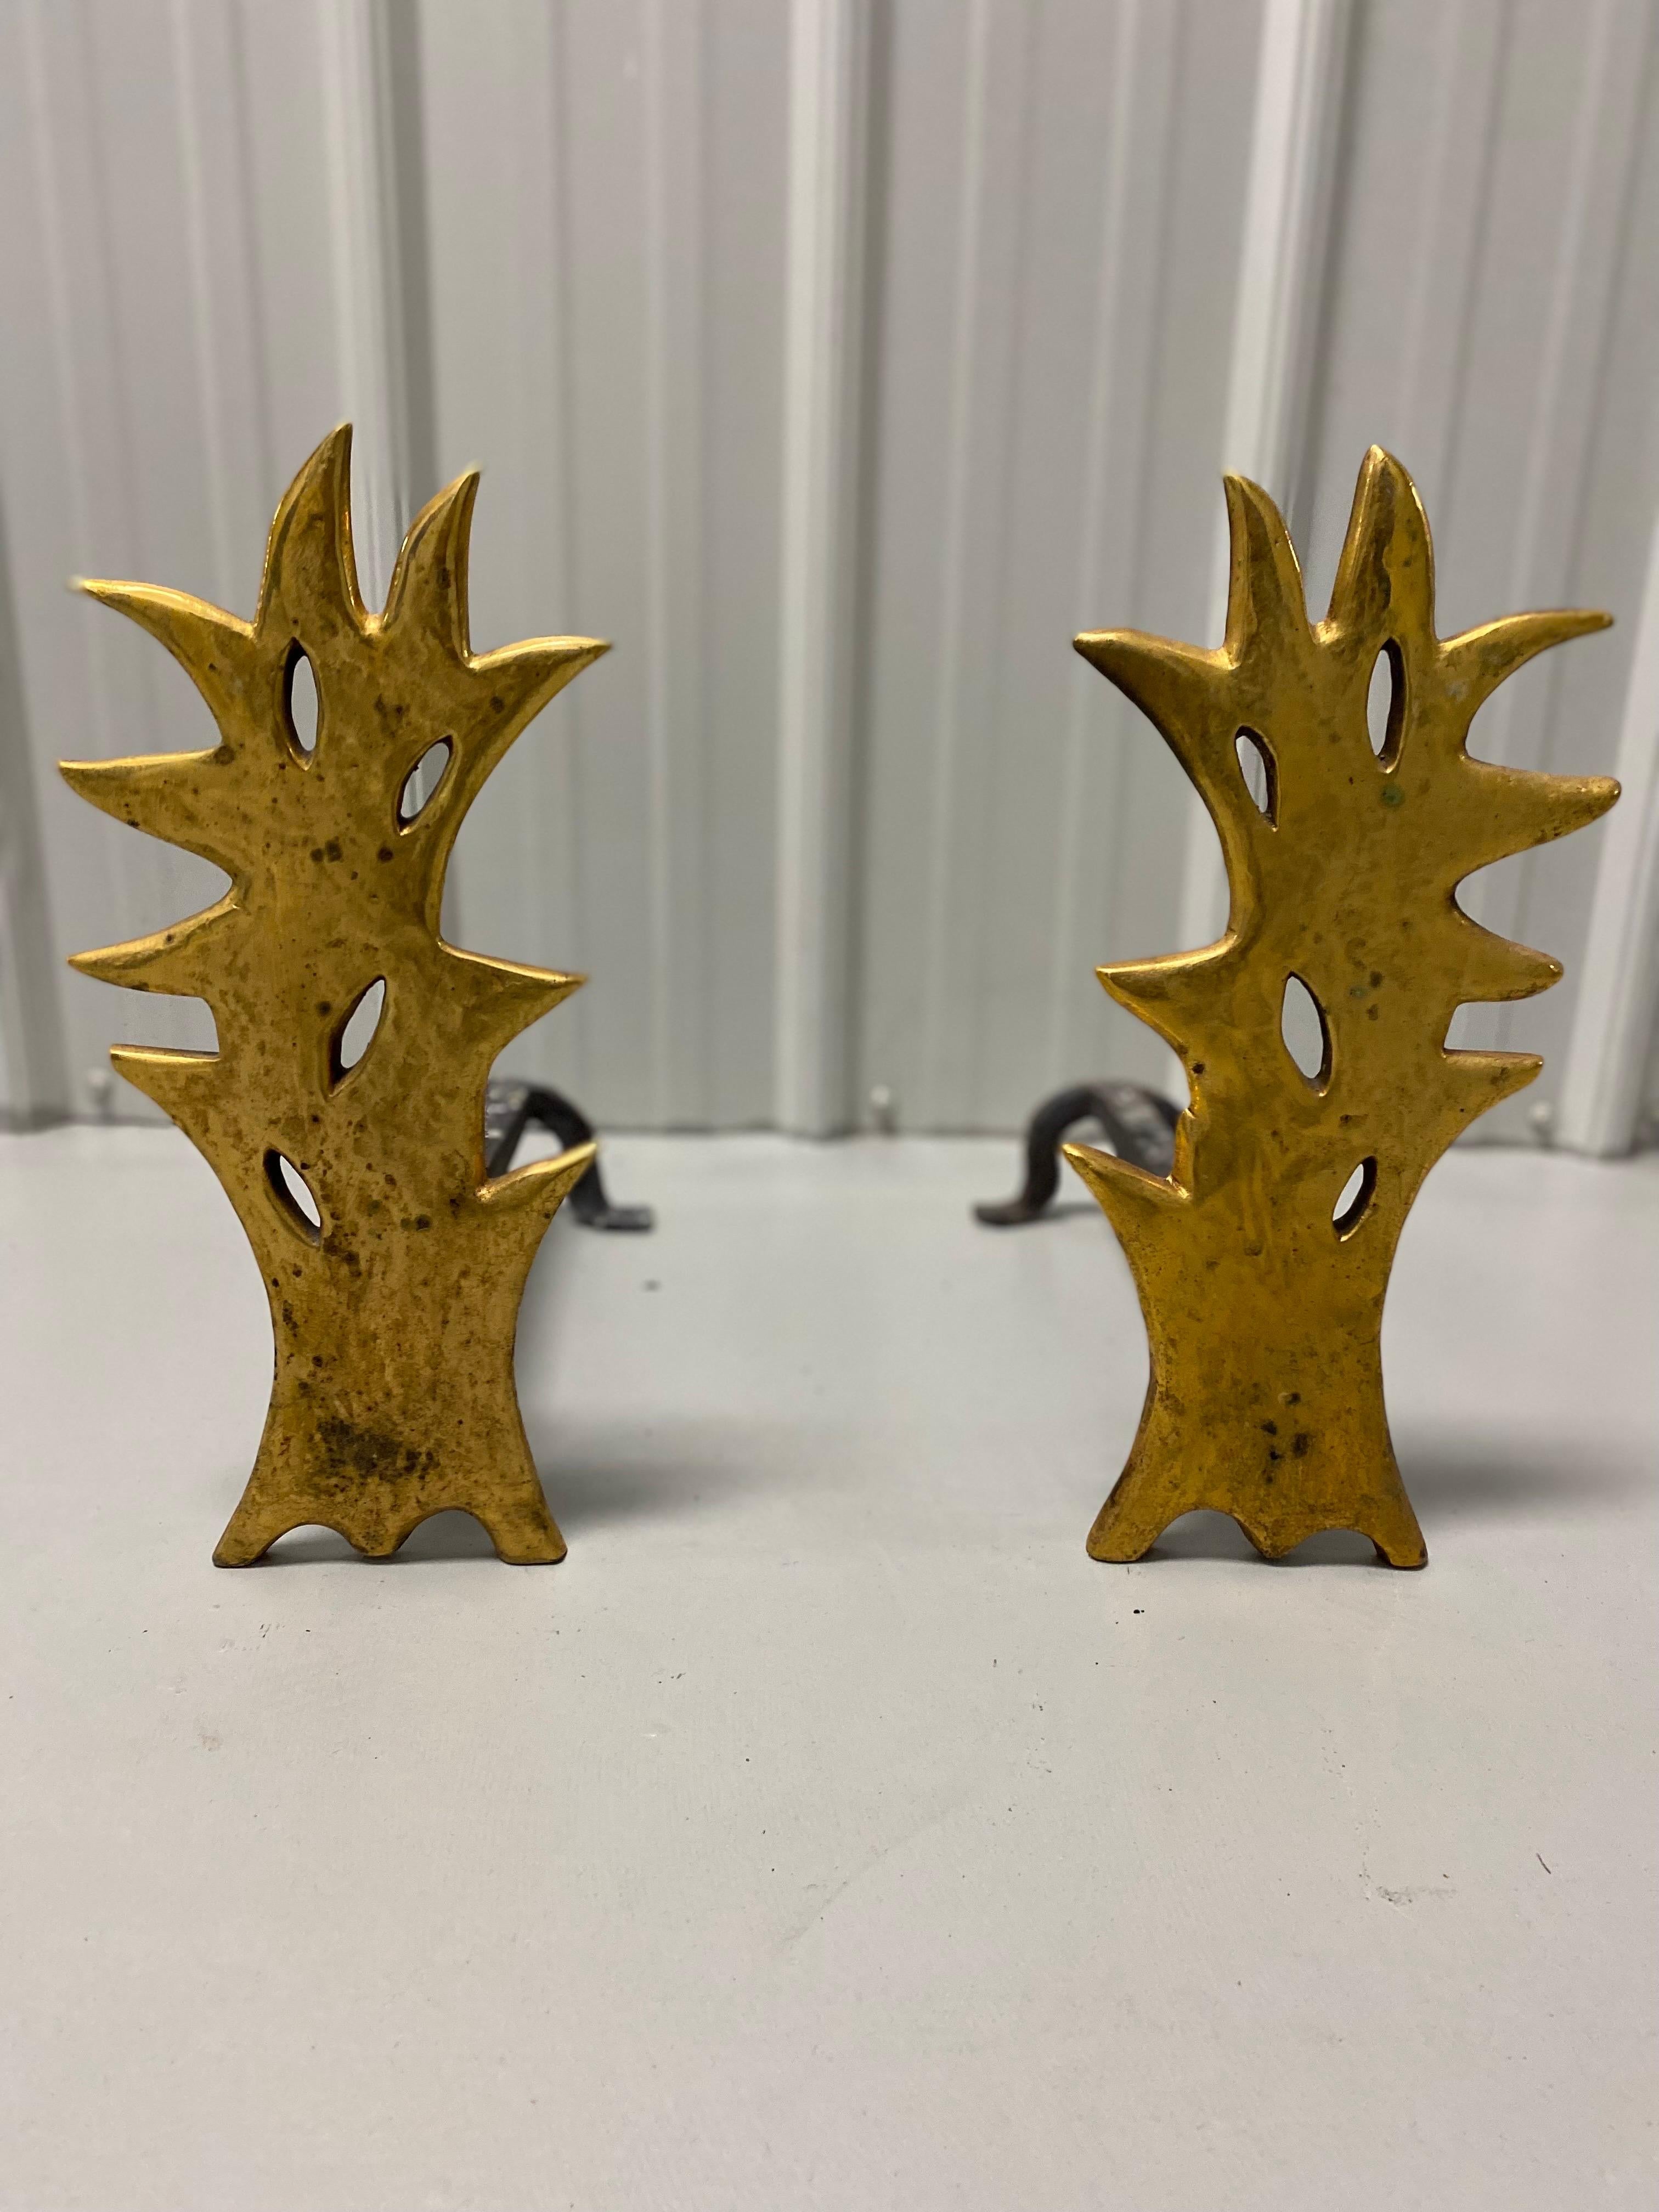 Pair of Herve Van Der Straeten Flame Gilt Bronze Andirons.
Chic pair of flame sculpted andirons made of gilt bronze. Irons fit into backs of bronze flames. Four pieces. Blackening from general use on backside.  Otherwise good condition with general